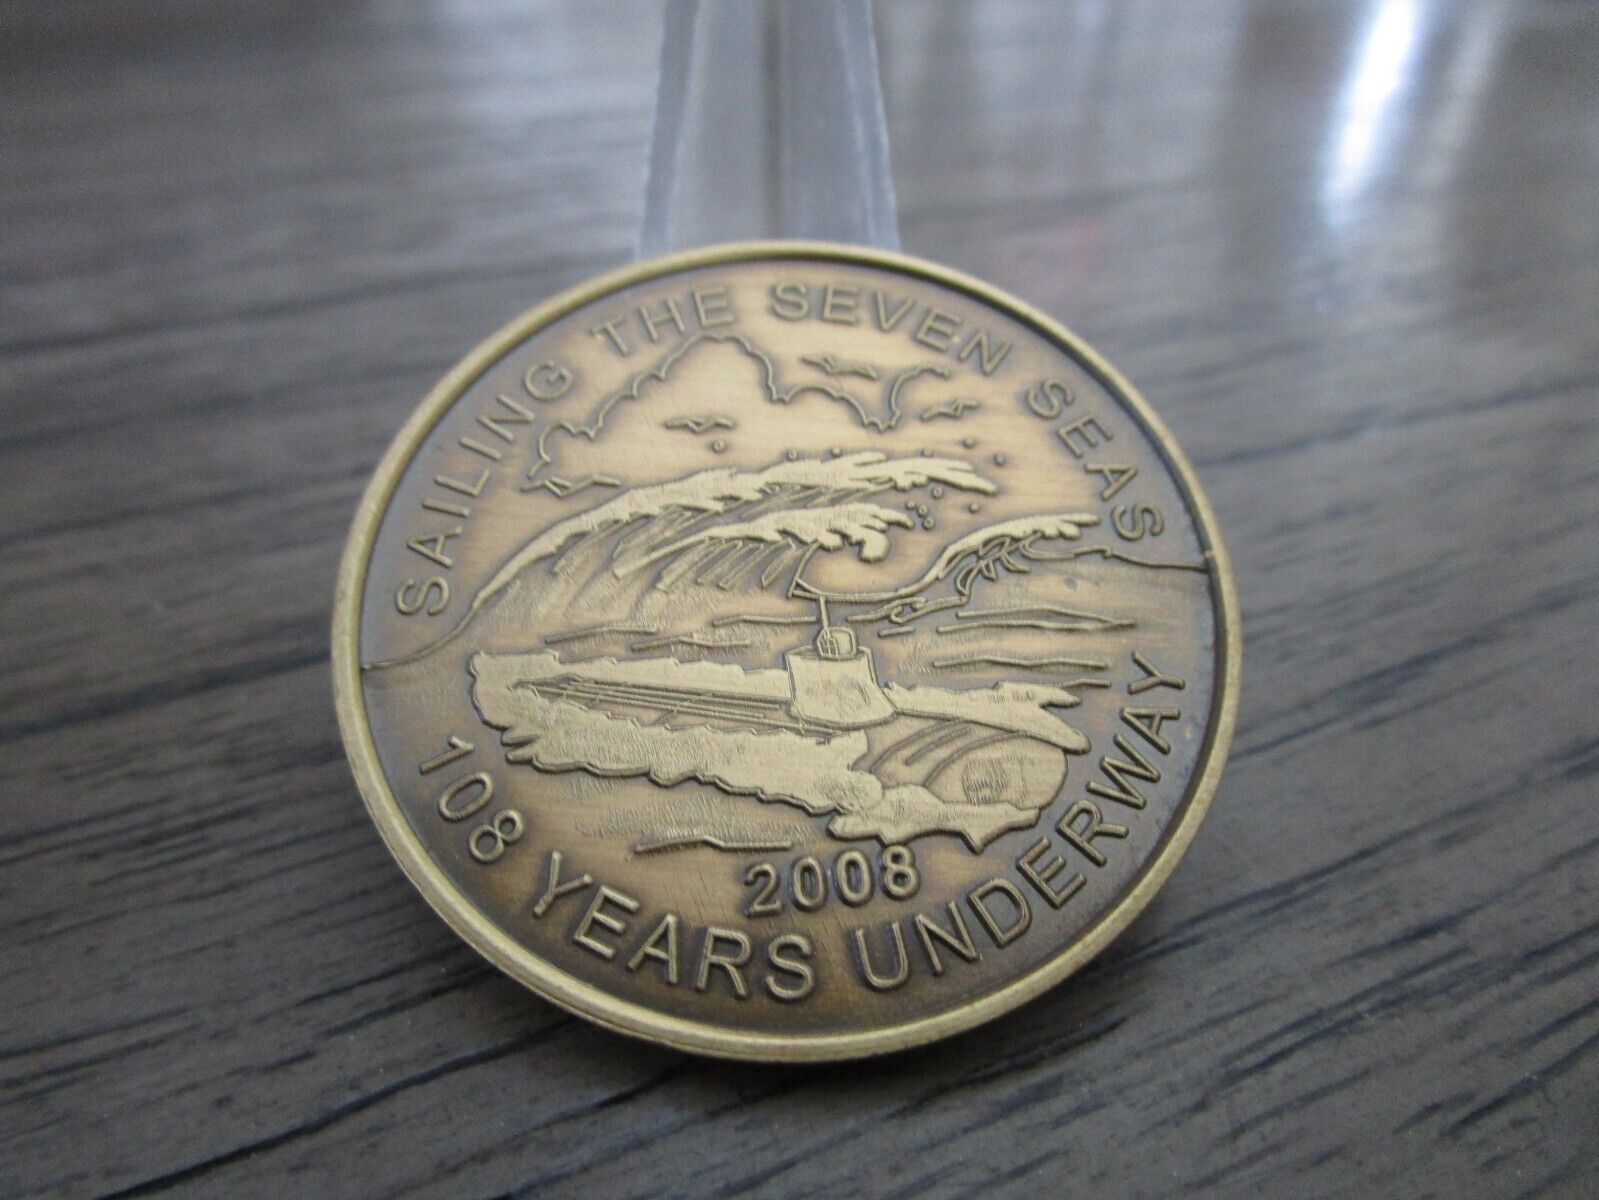 USN Submarine Birthday Ball 2008 Cape Canaveral FL 108 Years Challenge Coin